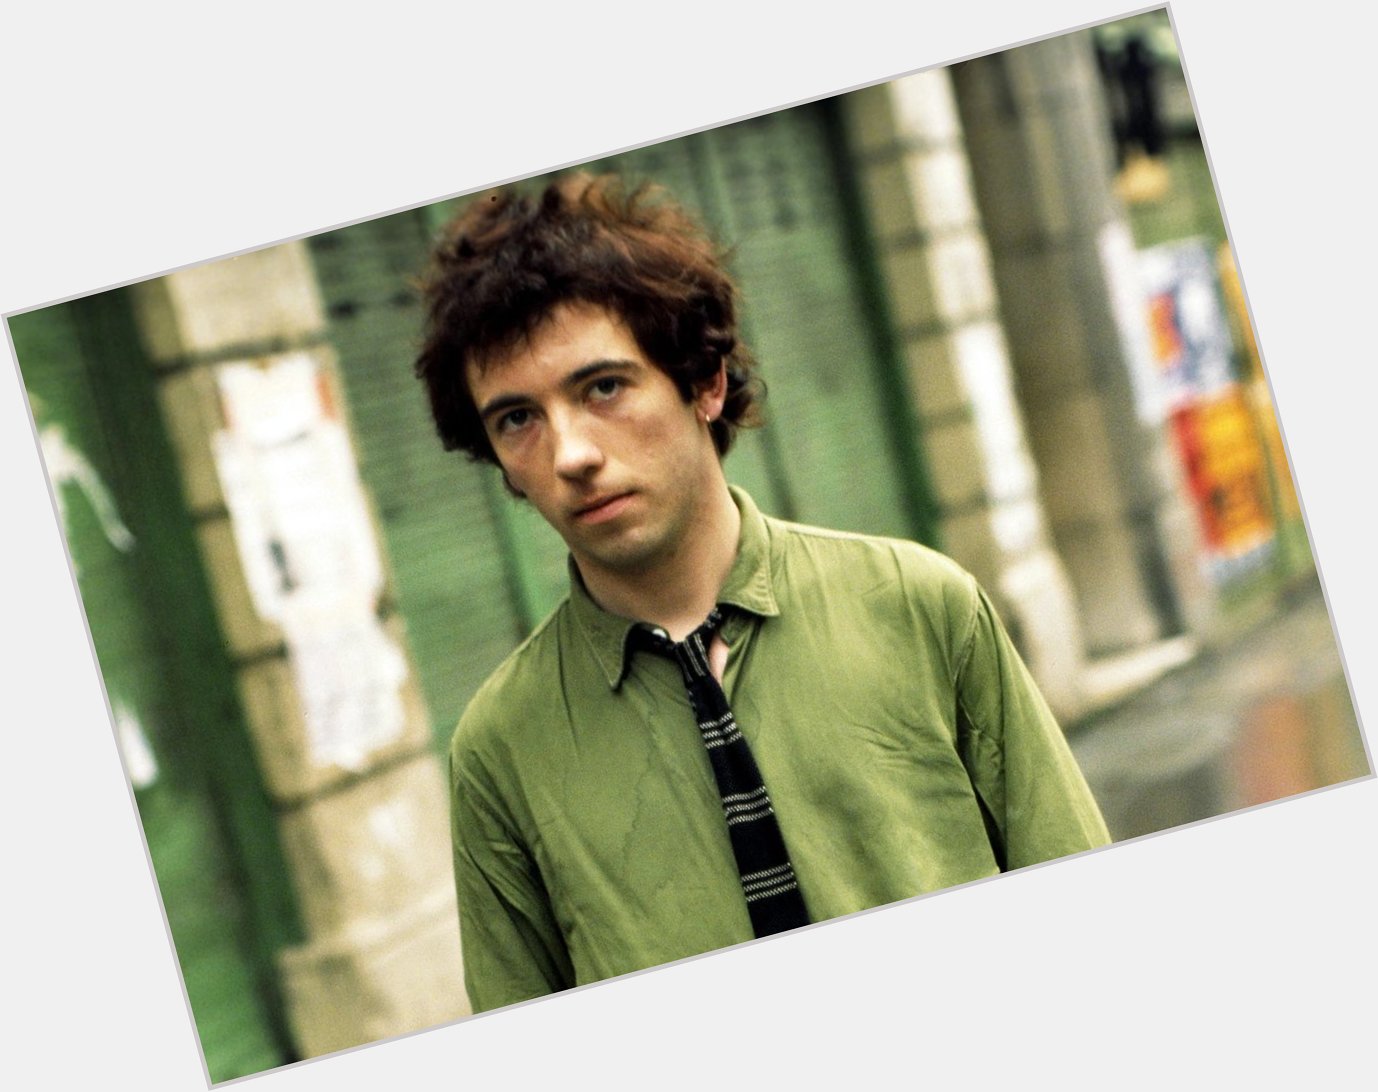 Pete Shelley would have turned 67 today. 

Life s an illusion, love is a dream.

Happy birthday, Pete.  